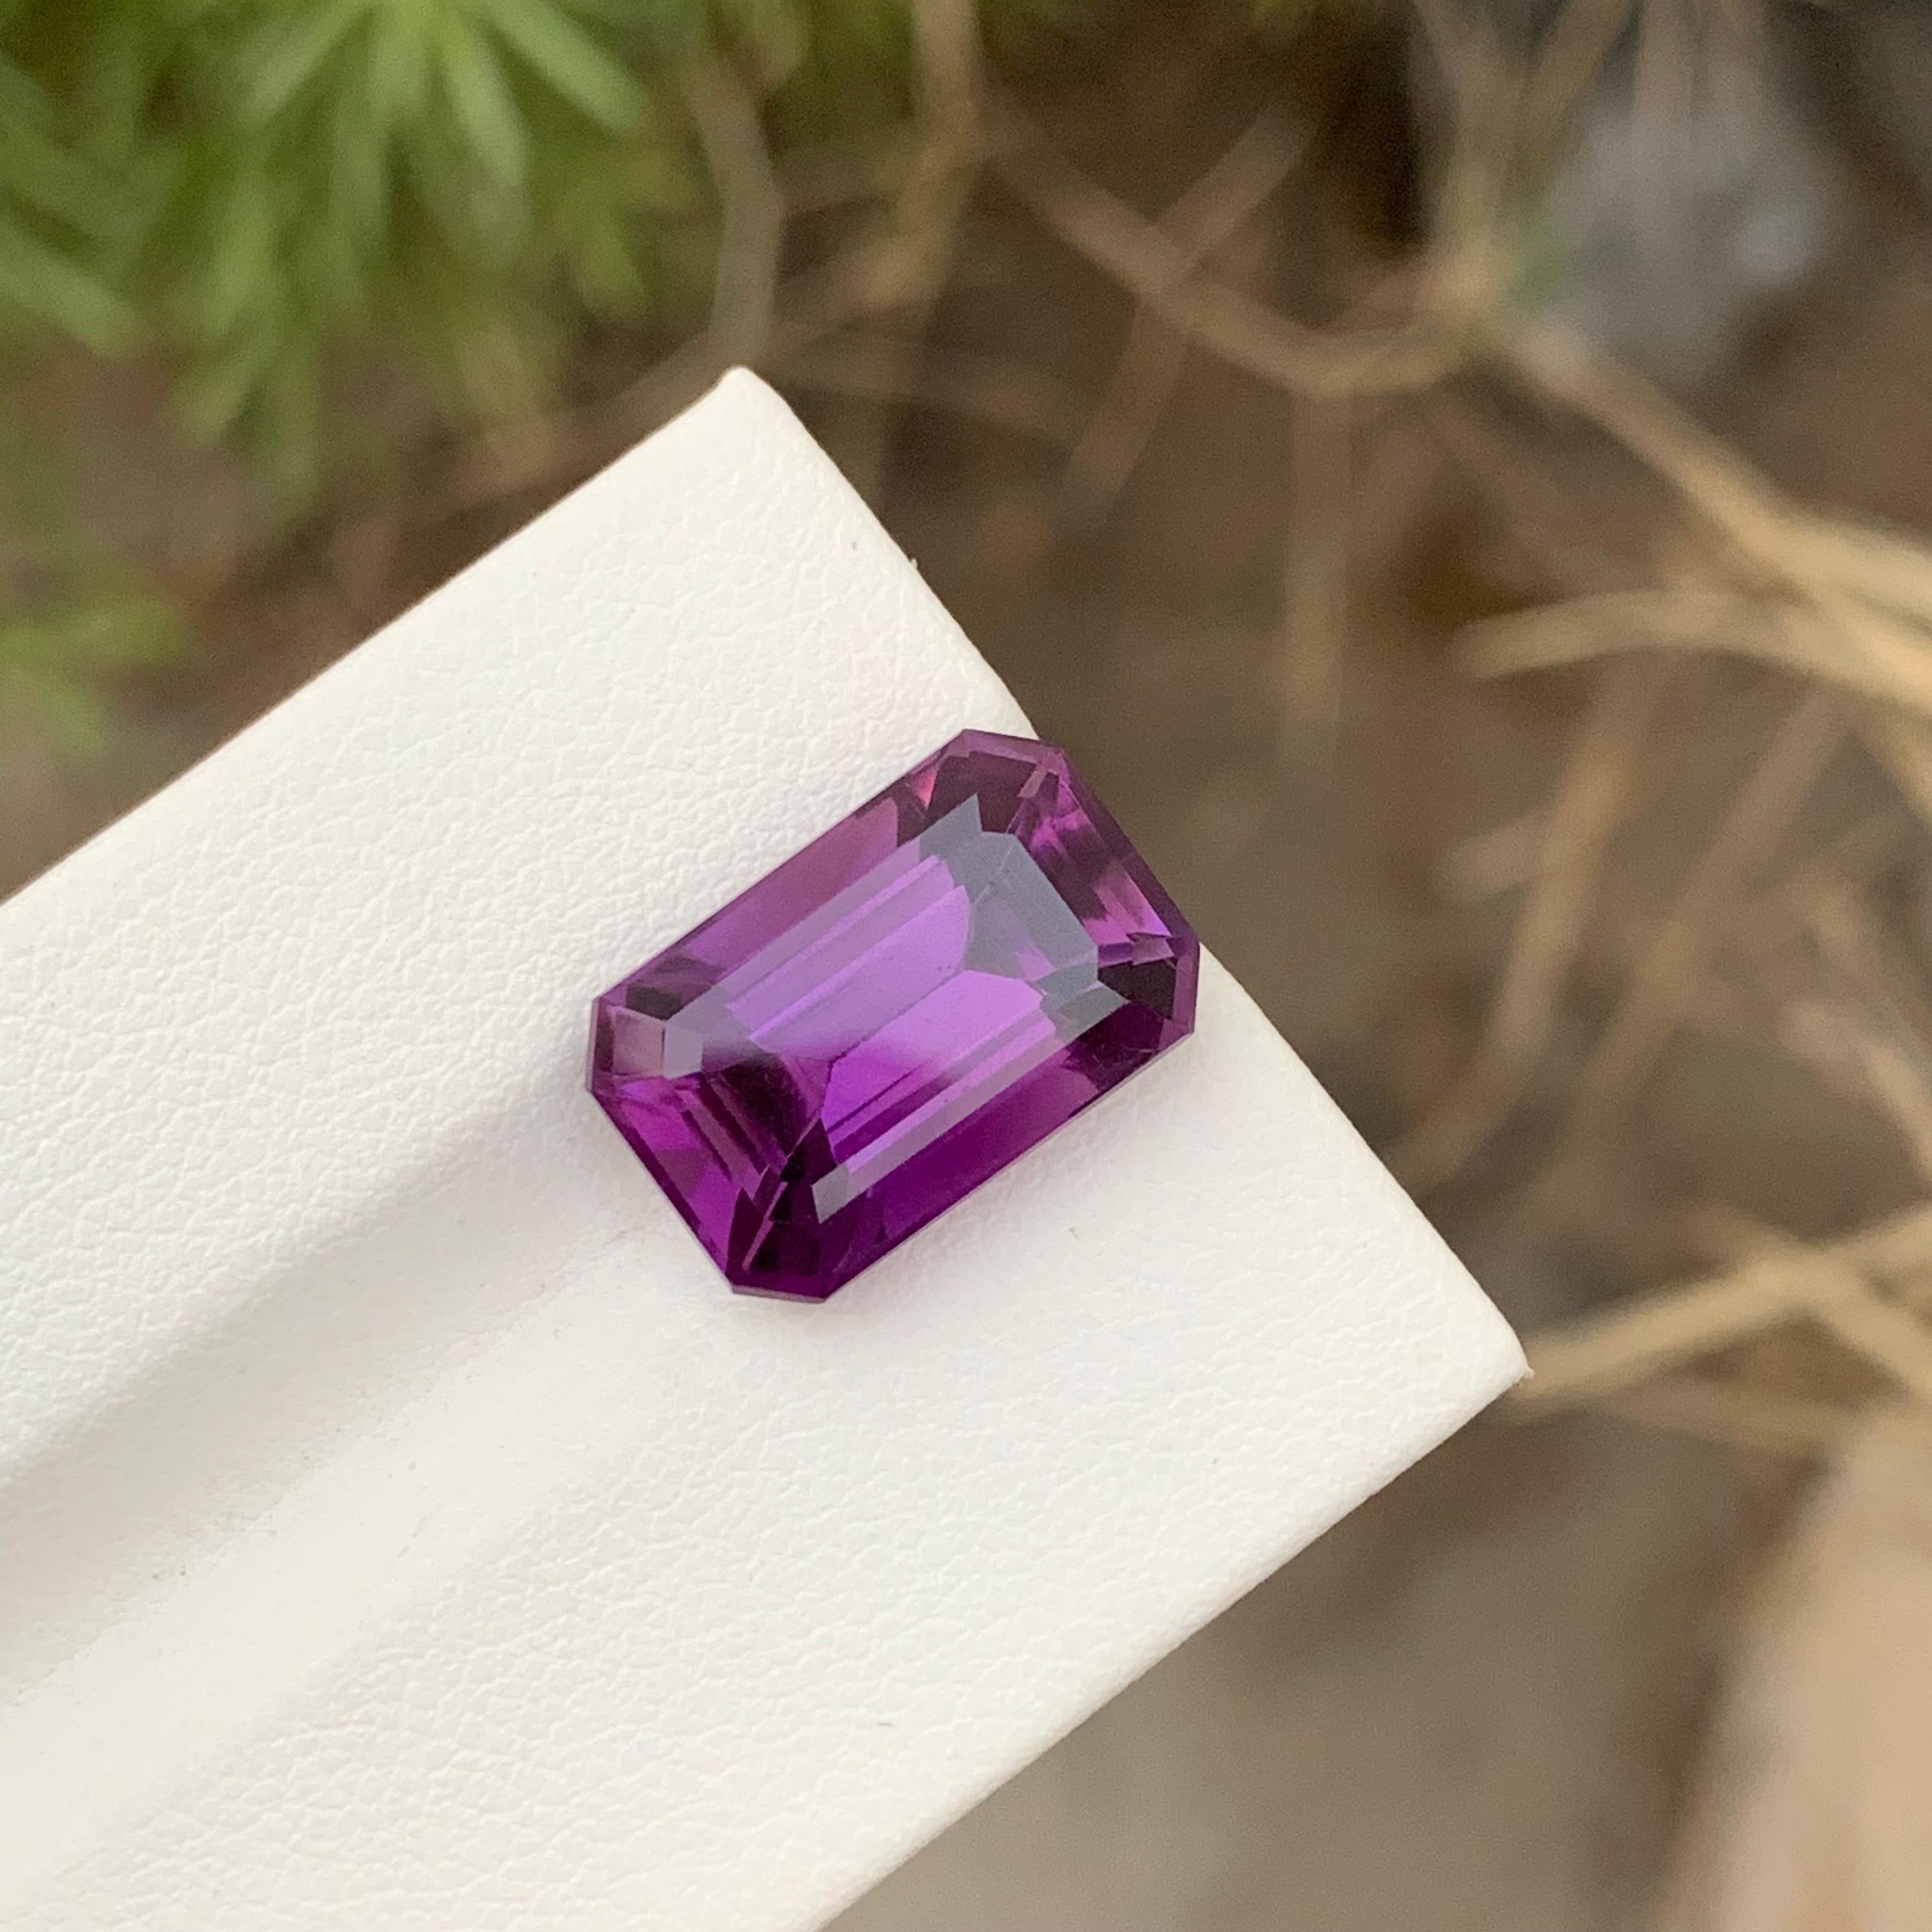 Loose Amethyst
Weight: 8.75 Carats
Dimension: 15 x 9.8 x 8.5 Mm
Colour: Purple
Origin: Brazil
Treatment: Non
Certificate: On Demand
Shape: Emerald

Amethyst, a stunning variety of quartz known for its mesmerizing purple hue, has captivated humans